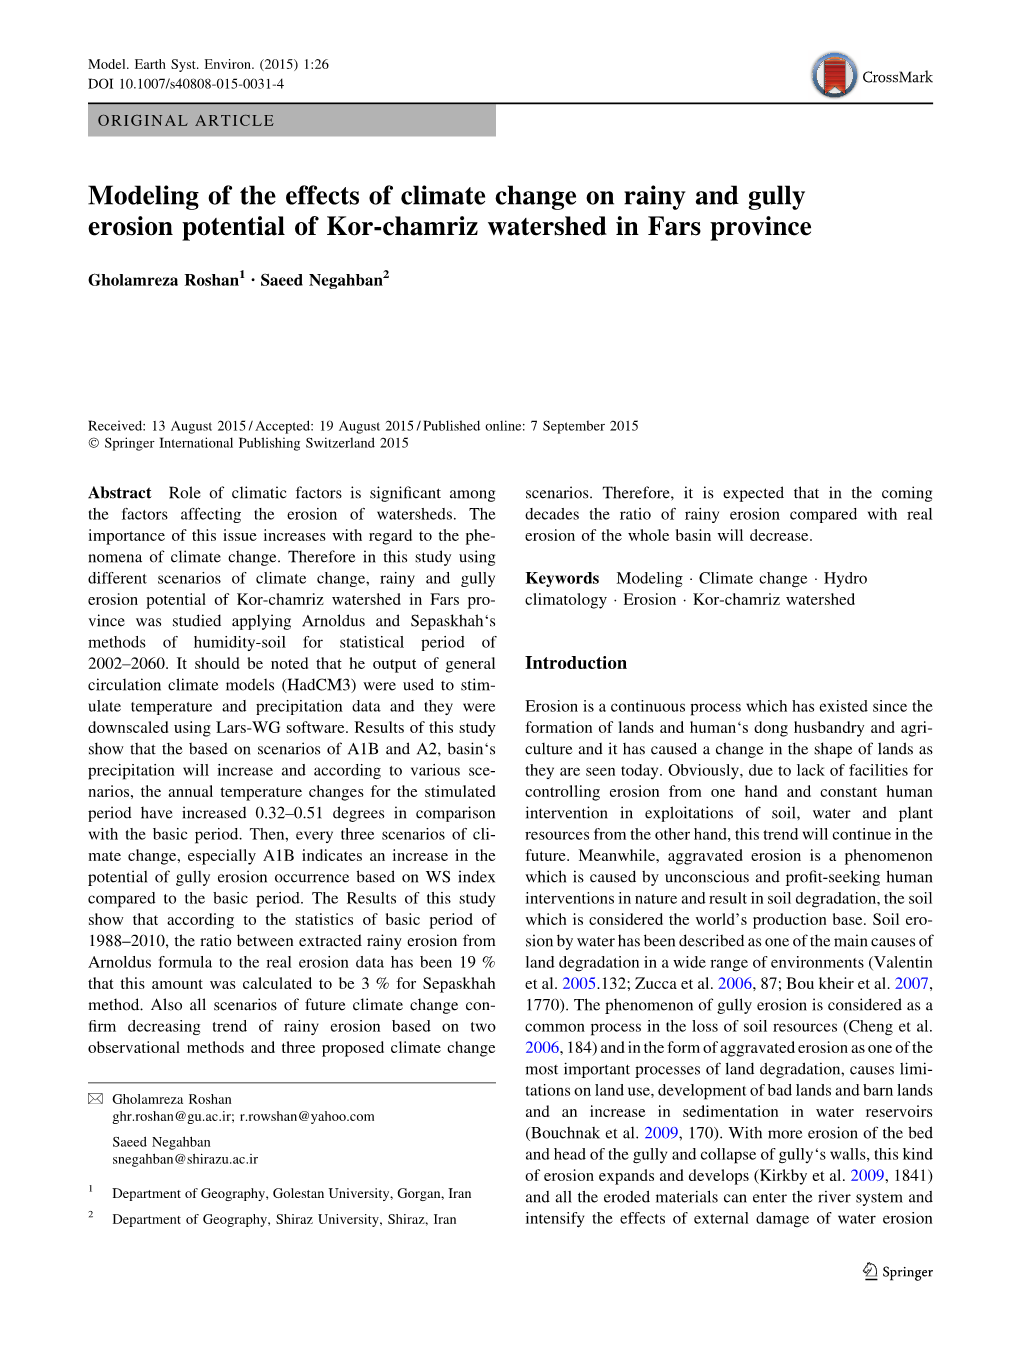 Modeling of the Effects of Climate Change on Rainy and Gully Erosion Potential of Kor-Chamriz Watershed in Fars Province